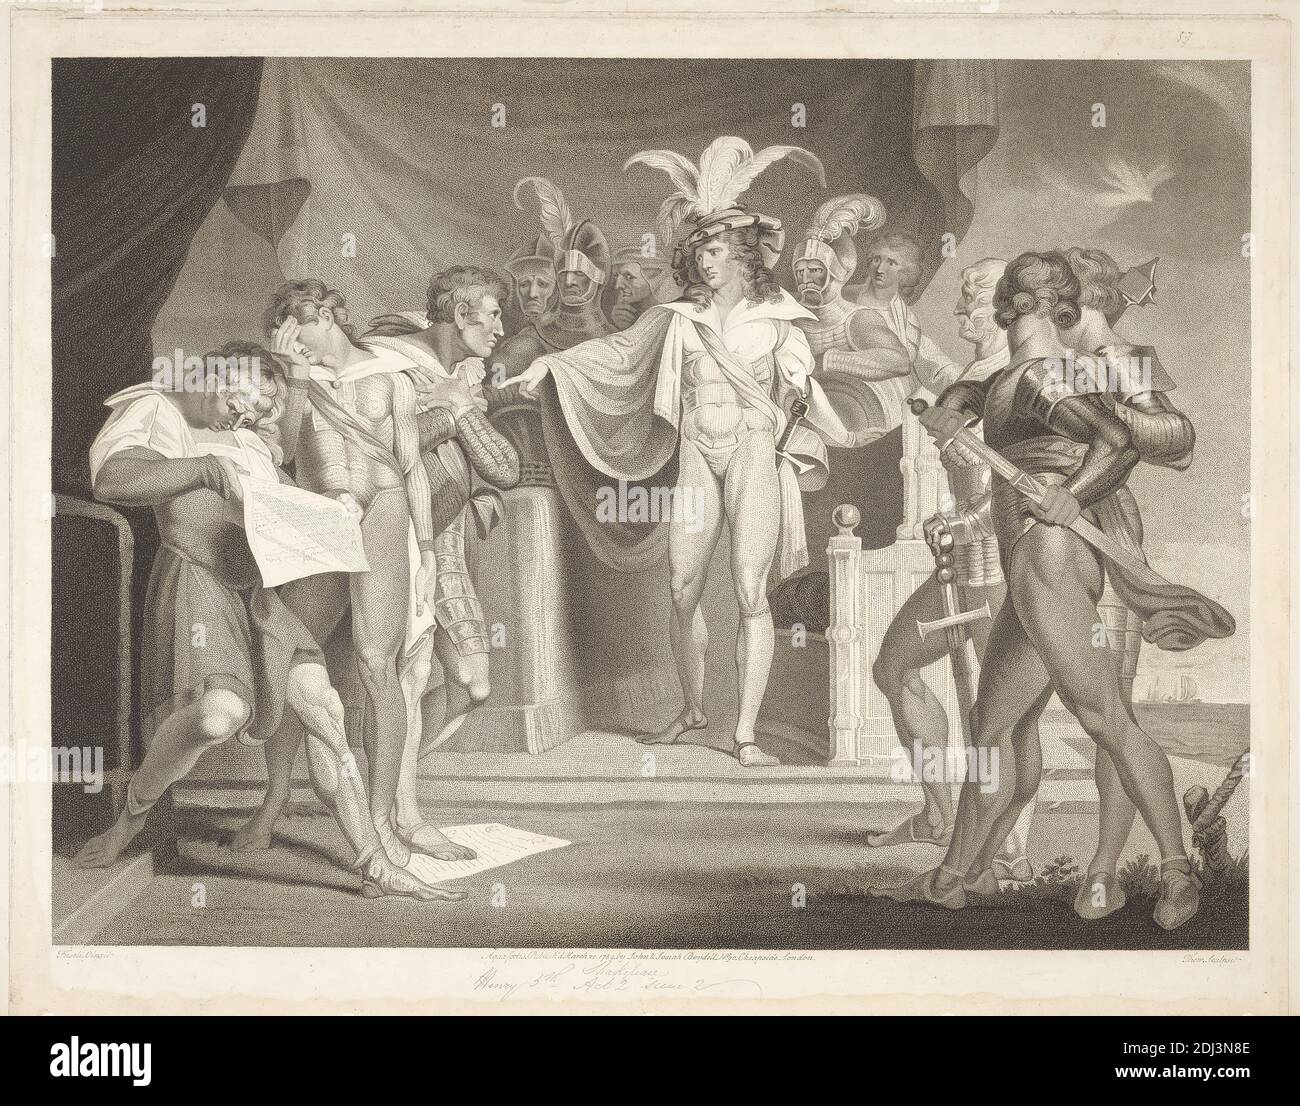 Henry V: Act II, Scene ii, Southamptom. The King, Scroop, etc., Robert Thew, 1758–1802, British, after Henry Fuseli, 1741–1825, Swiss, active in Britain (1766–70; 1779 on), 1803, Engraving, Sheet: 17 5/16 x 23 3/8in. (44 x 59.4cm Stock Photo